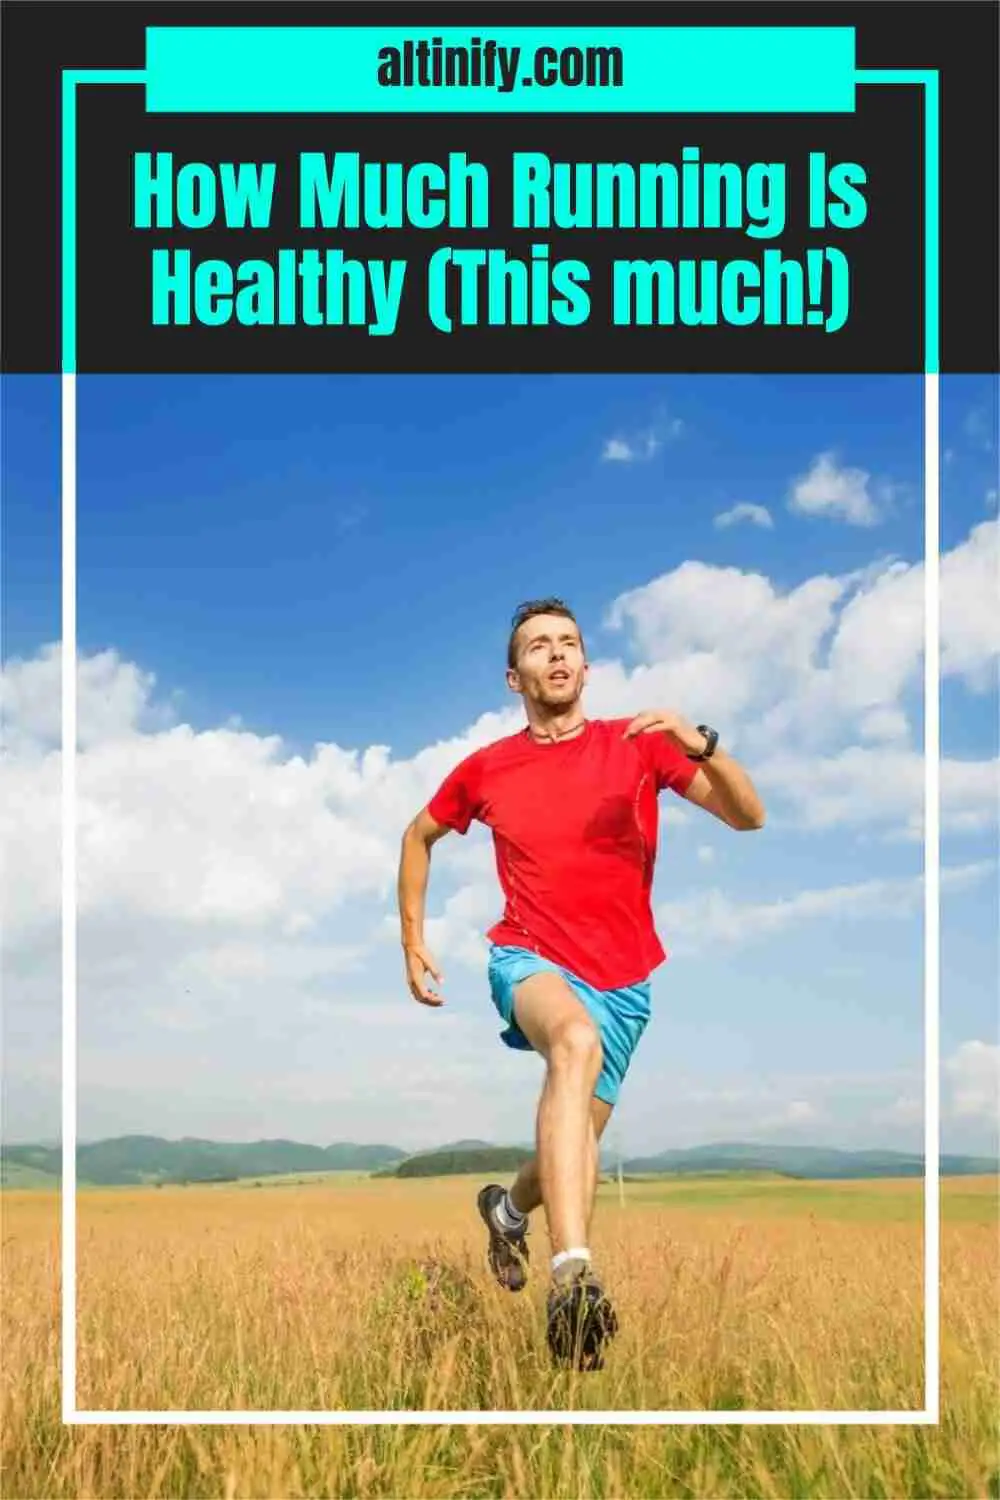 How Much Running Is Healthy? (This much!)